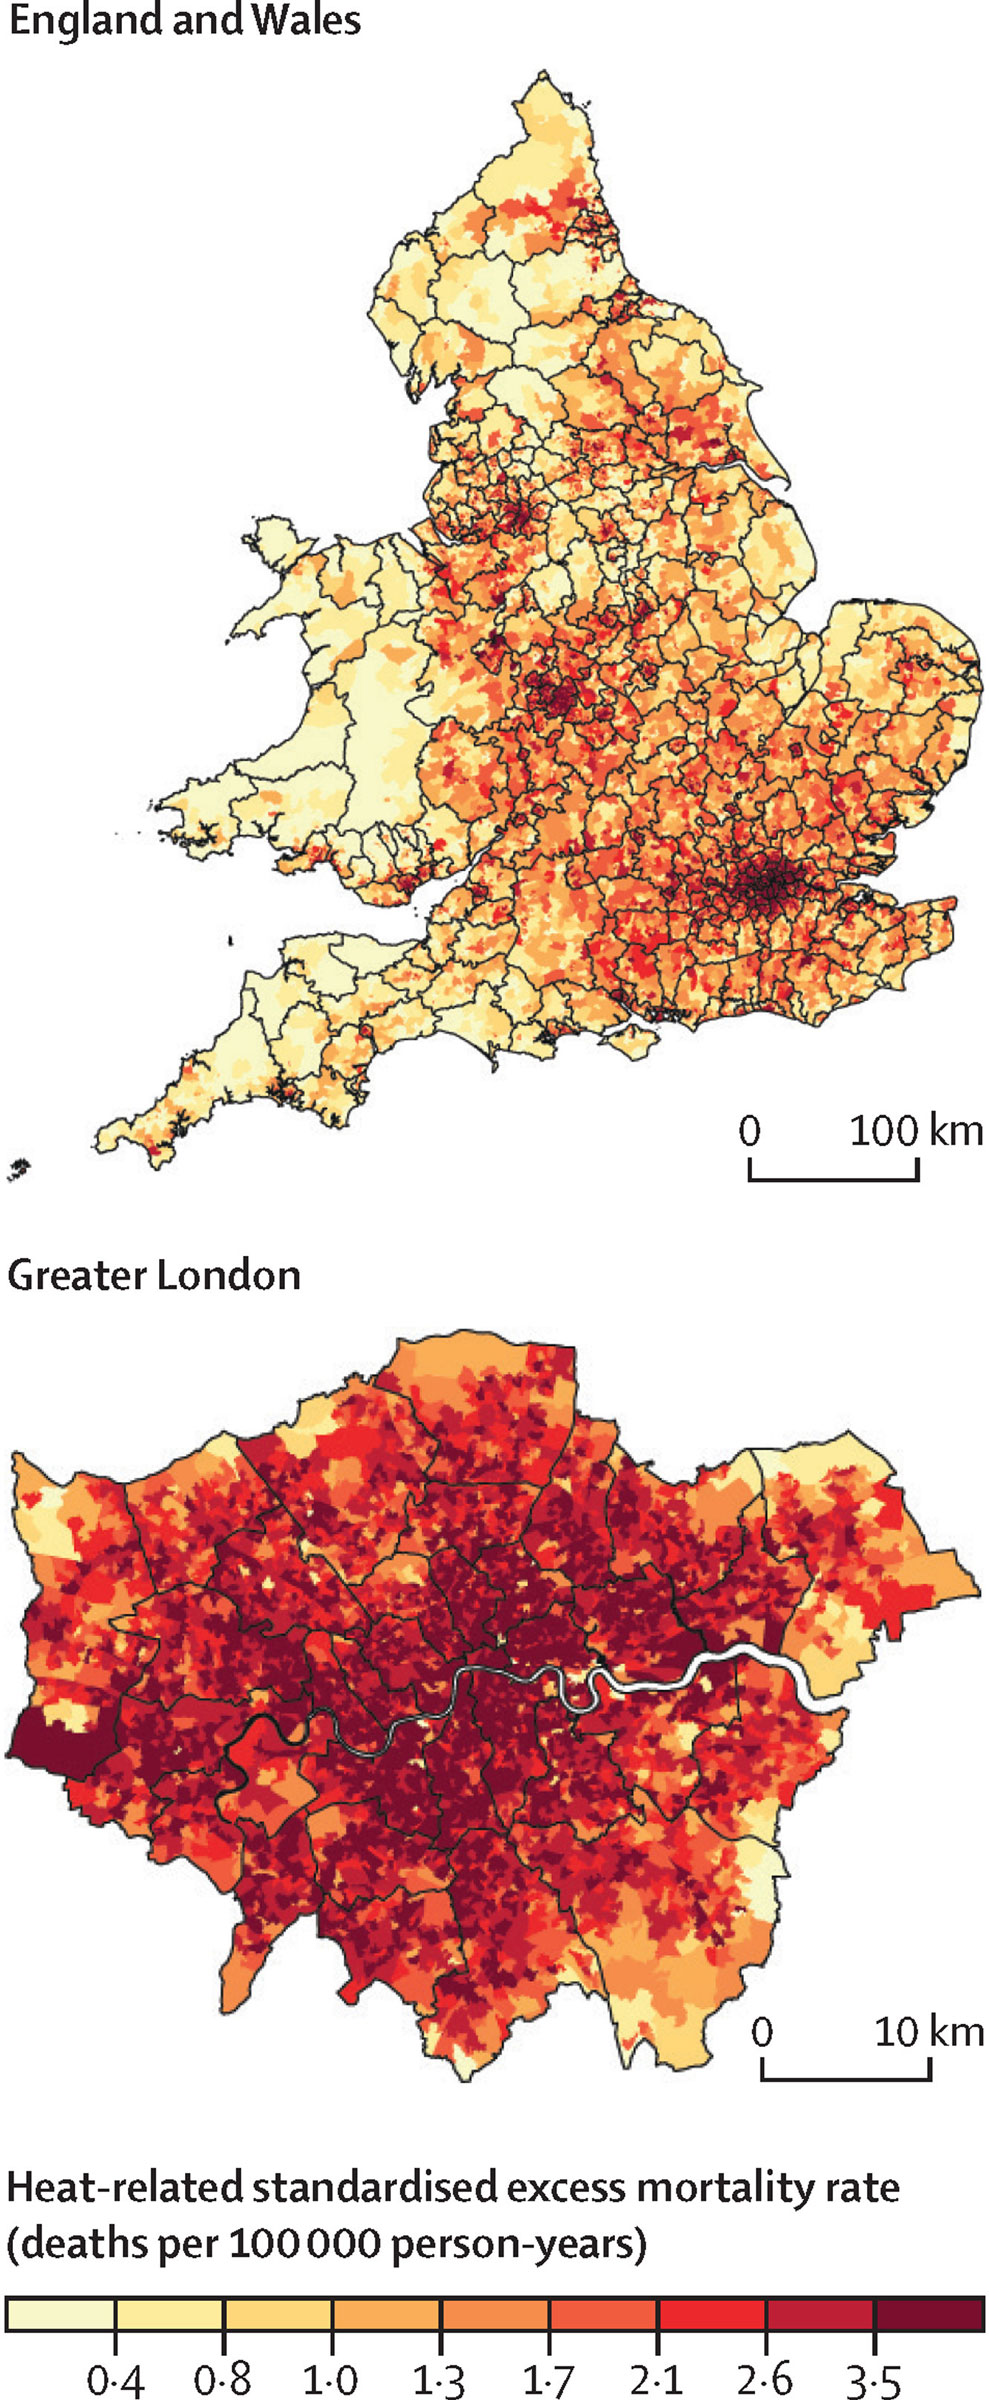 Highly localized maps of England and Wales (top) and London (bottom) showing which communities are most vulnerable to heat-related fatalities. (Gasparrini et al. / The Lancet Planetary Health)